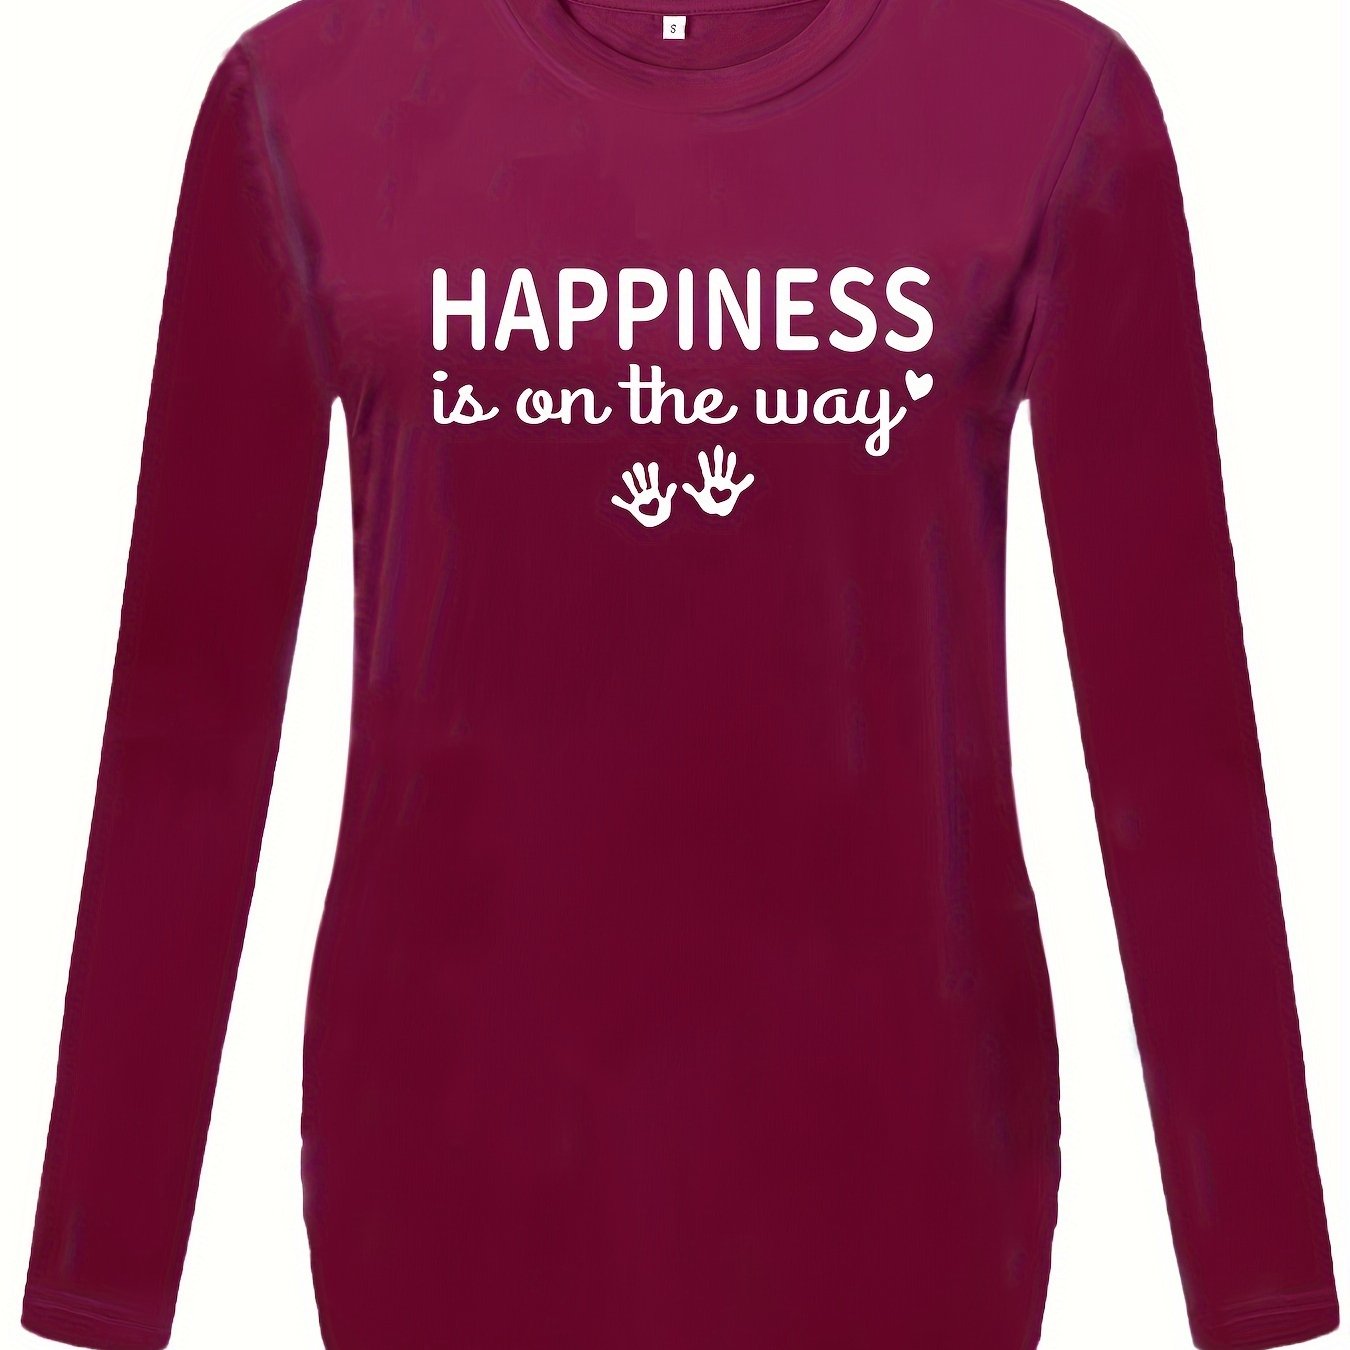 Happiness Is On The Way Women's Christian Maternity Pullover Sweatshirt claimedbygoddesigns